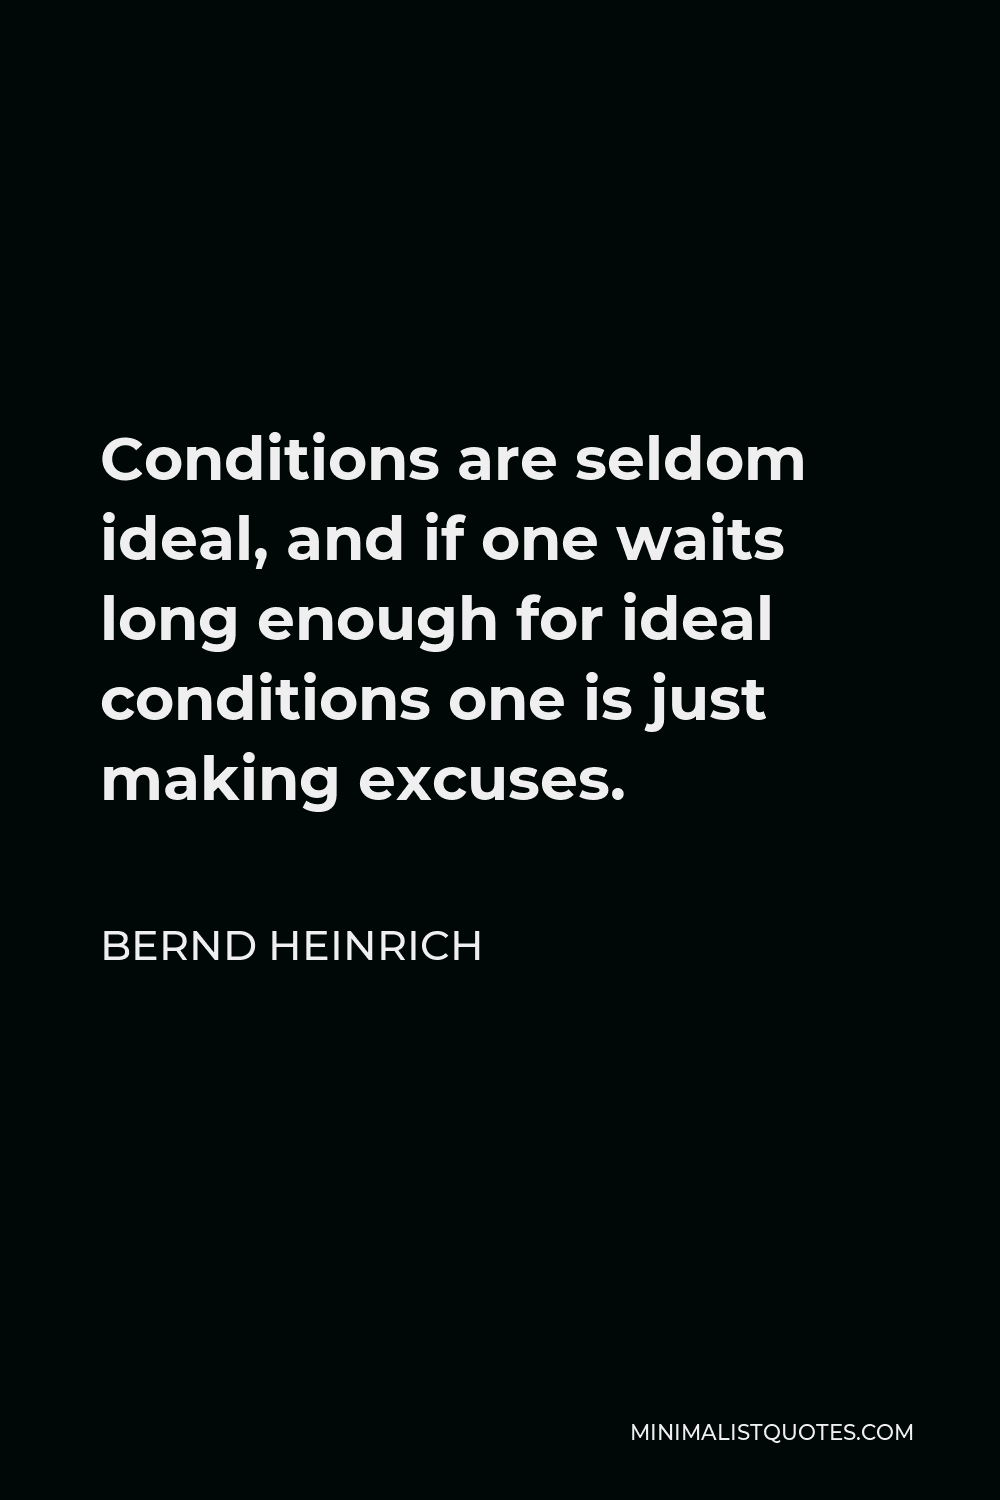 Bernd Heinrich Quote - Conditions are seldom ideal, and if one waits long enough for ideal conditions one is just making excuses.